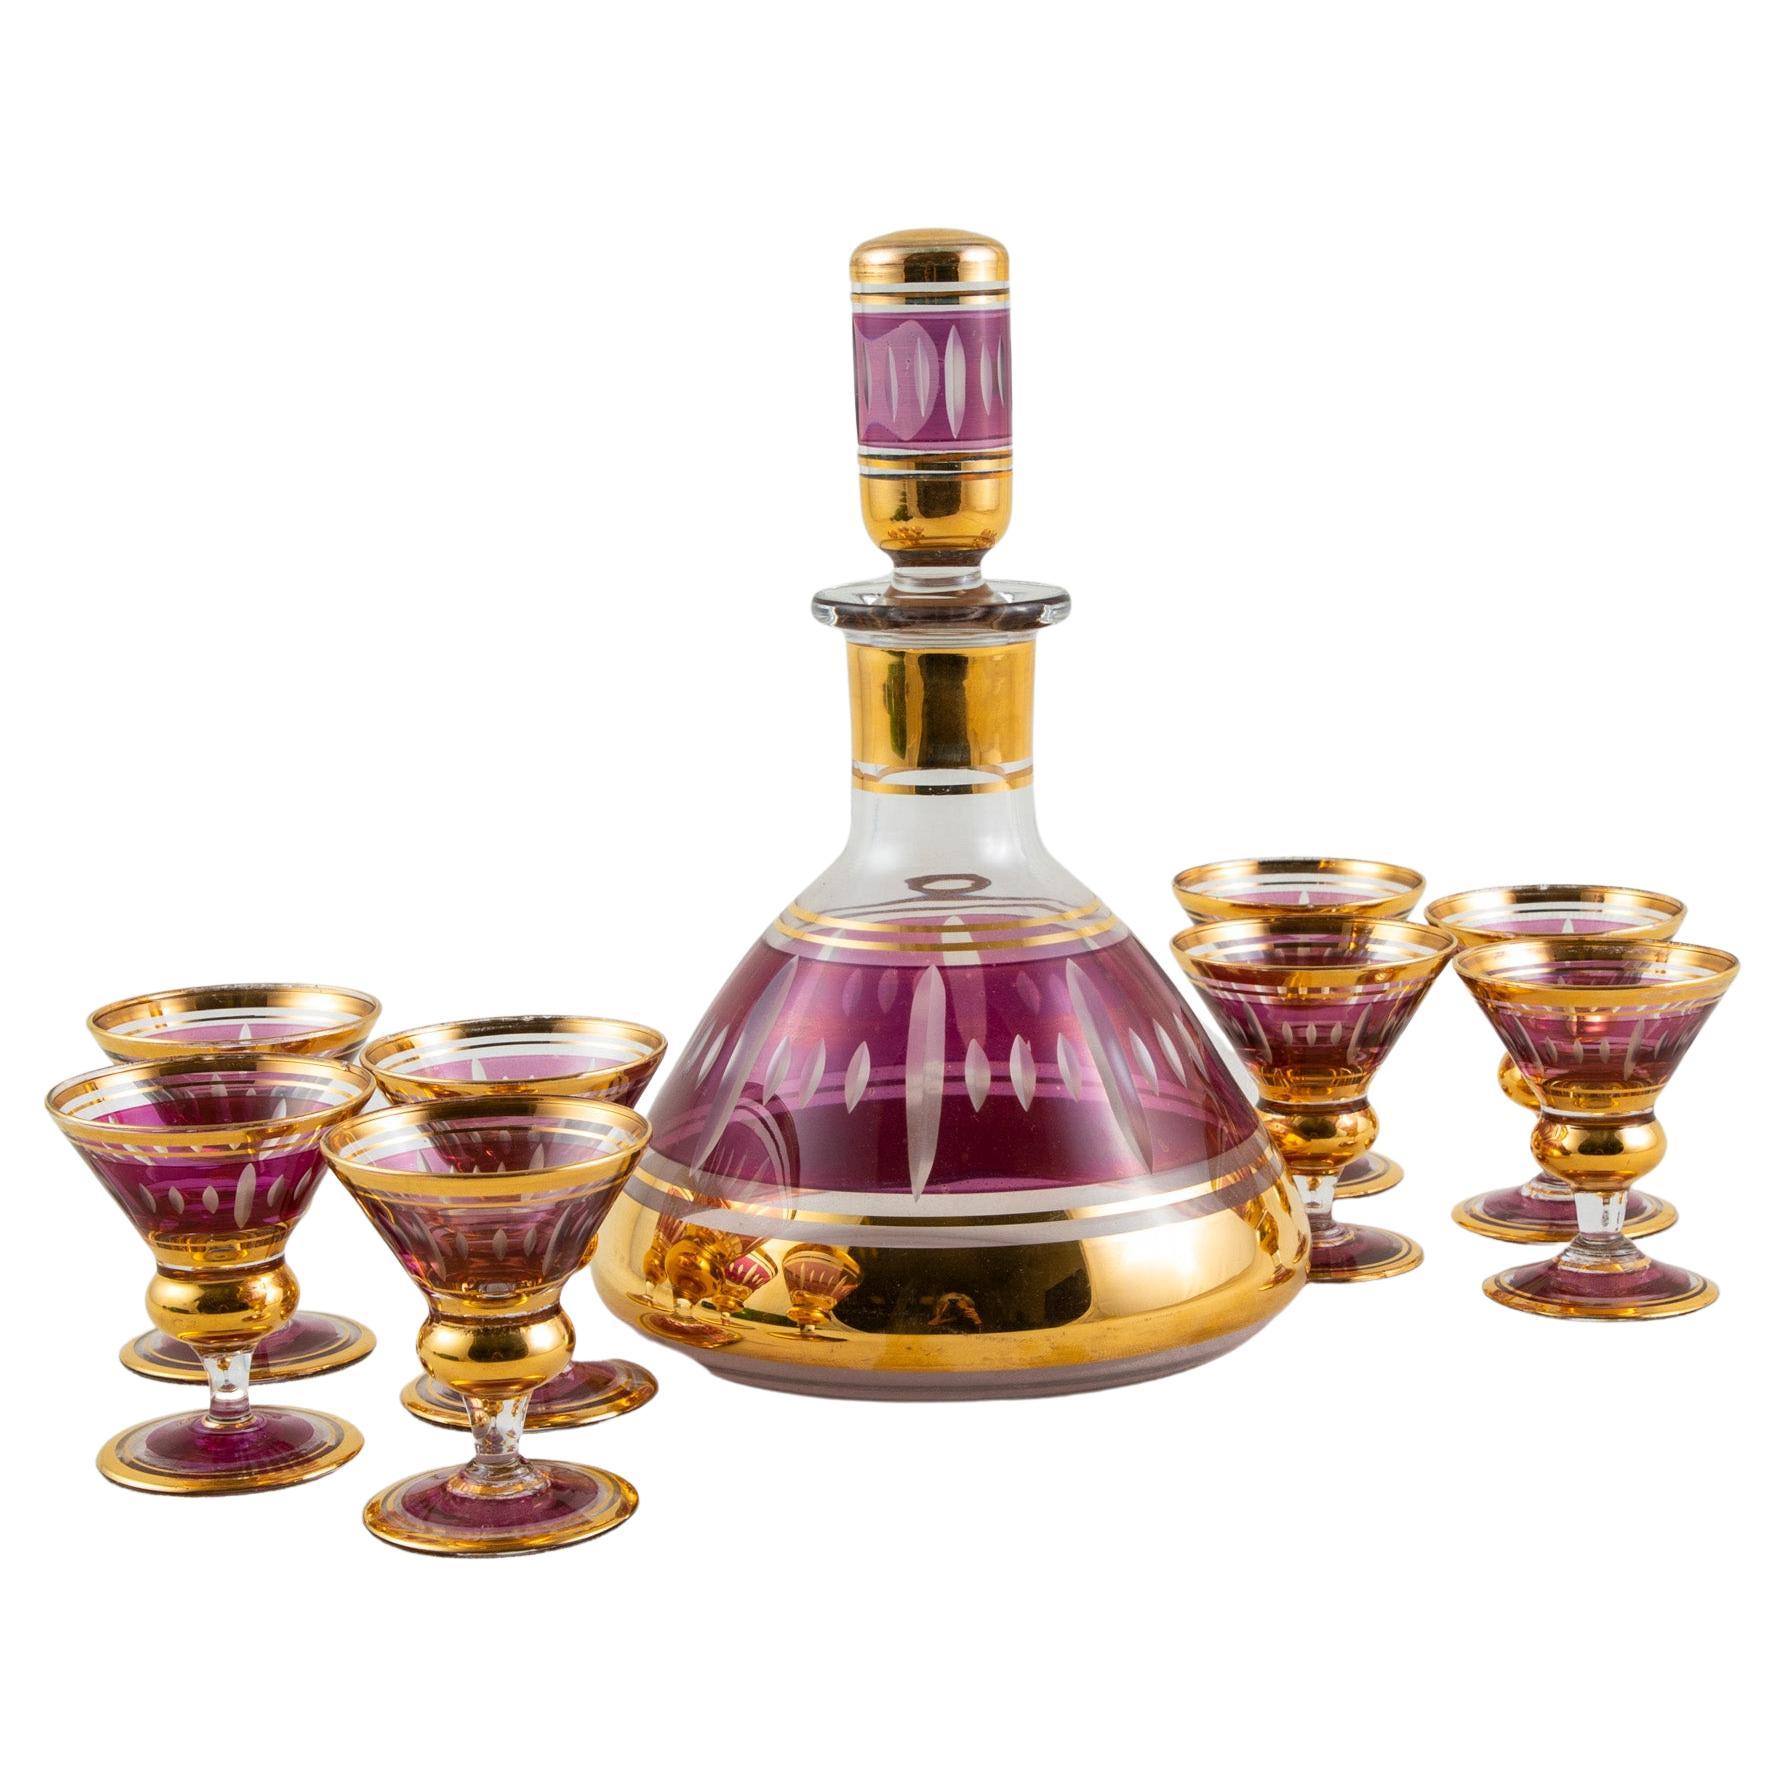 Mid-20th Century French Art Deco Period Crystal Liqueur Service